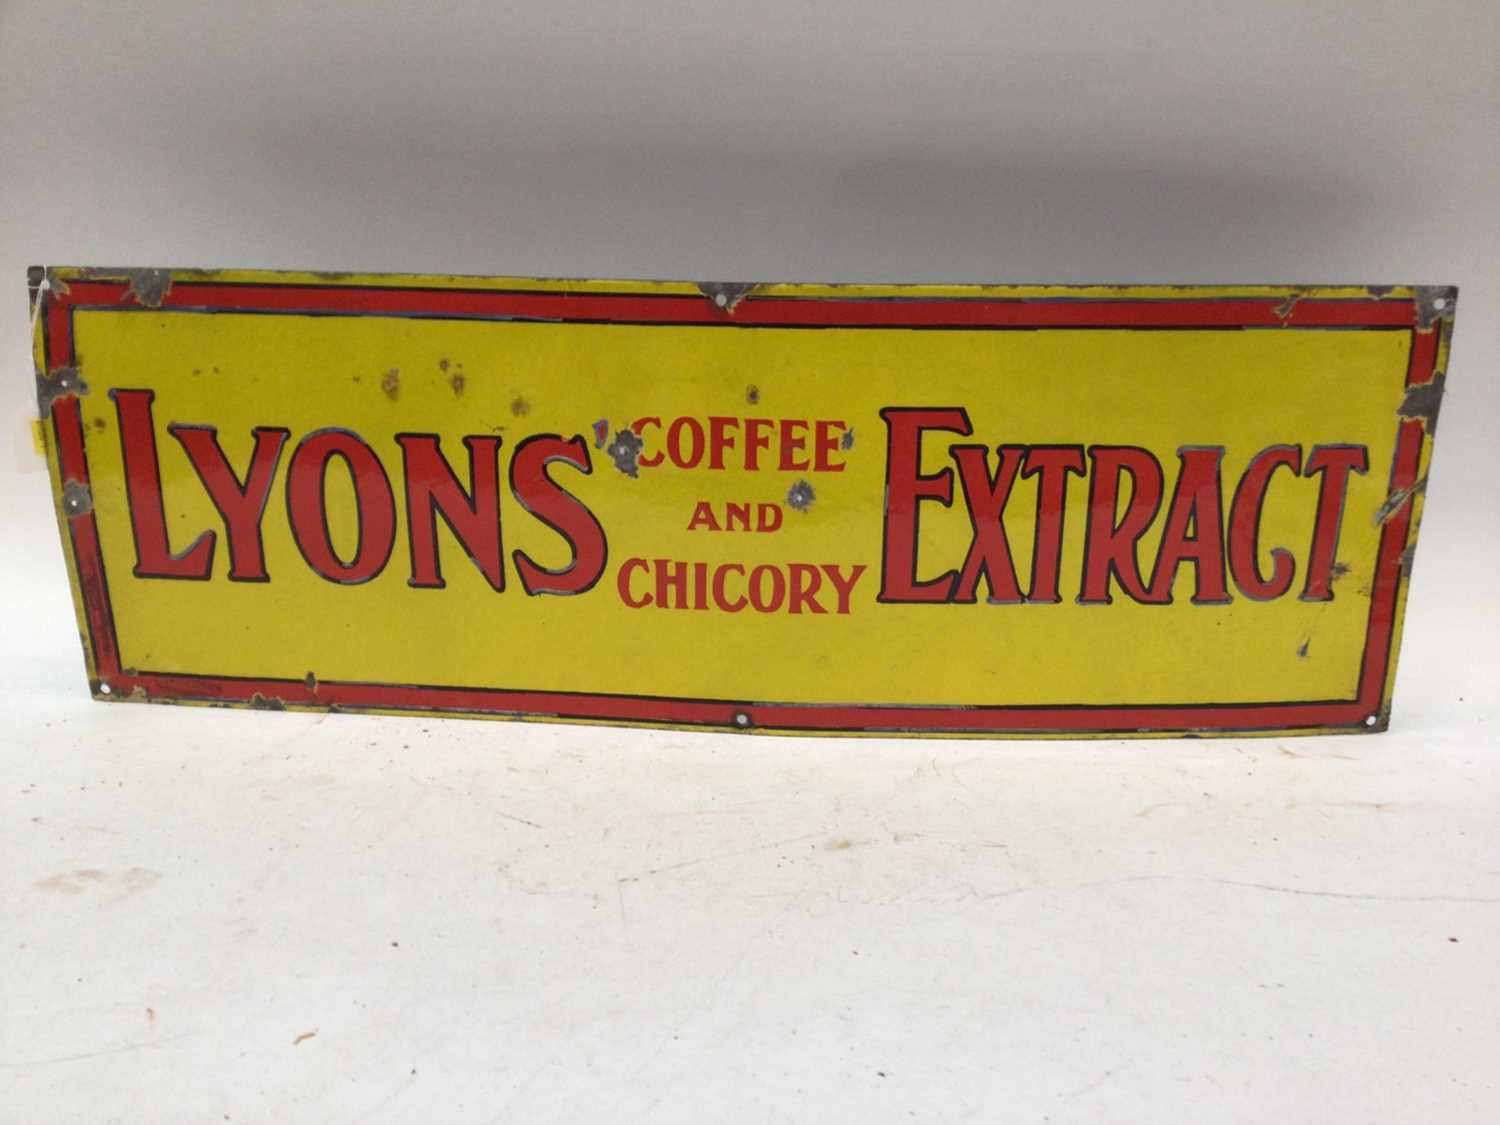 Vintage enamel sign - 'Lyons Coffee and Chicory Extract' - red on a yellow sign